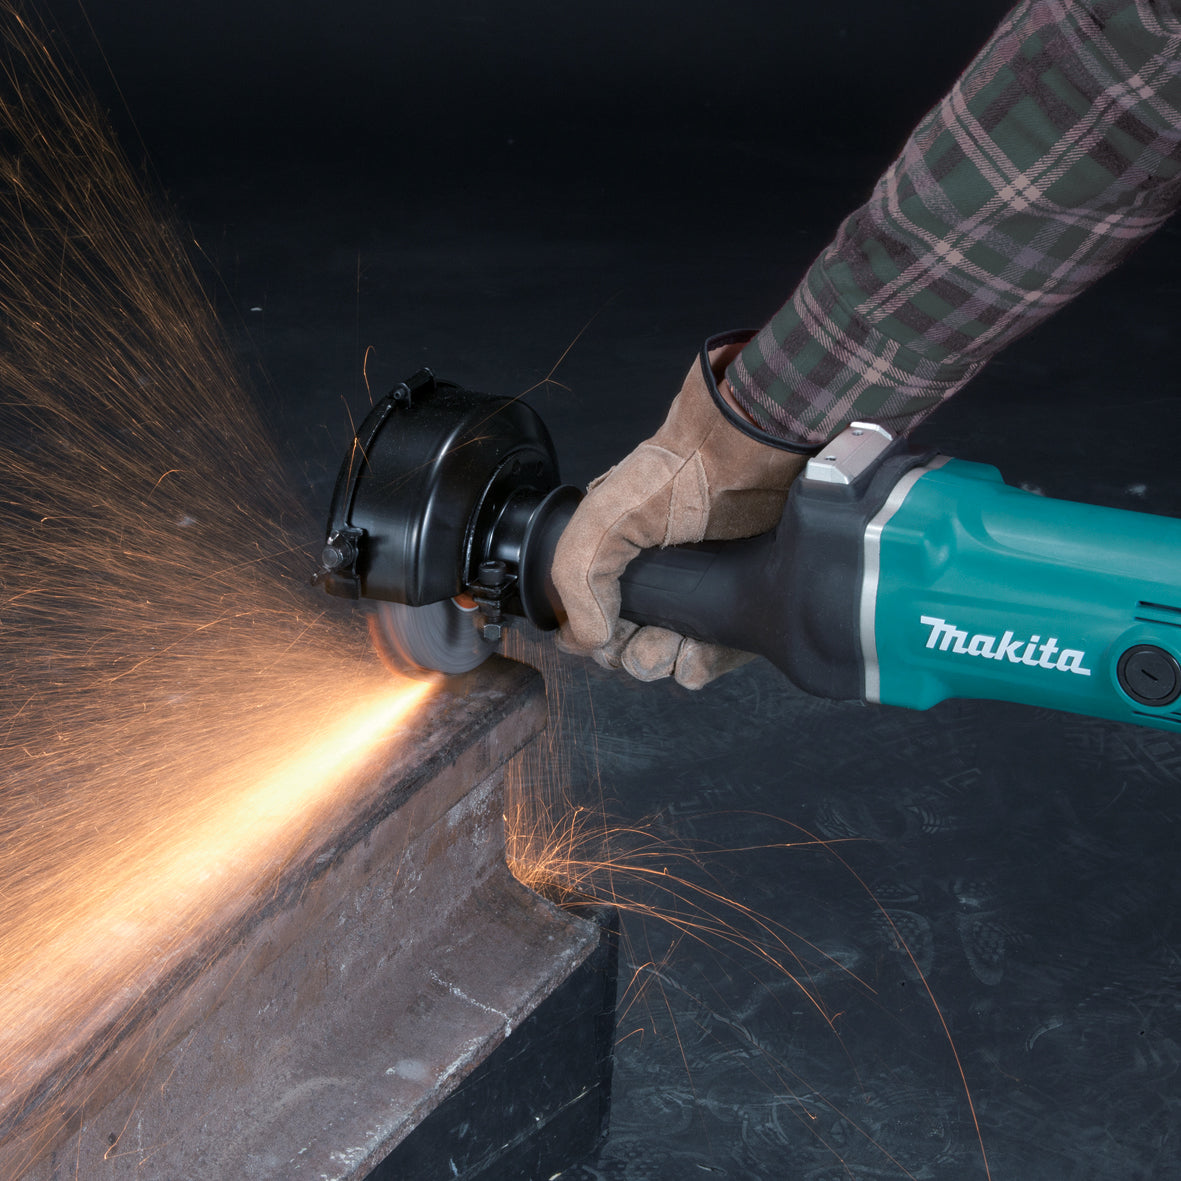 125mm (5") Straight Grinder GS5000 by Makita